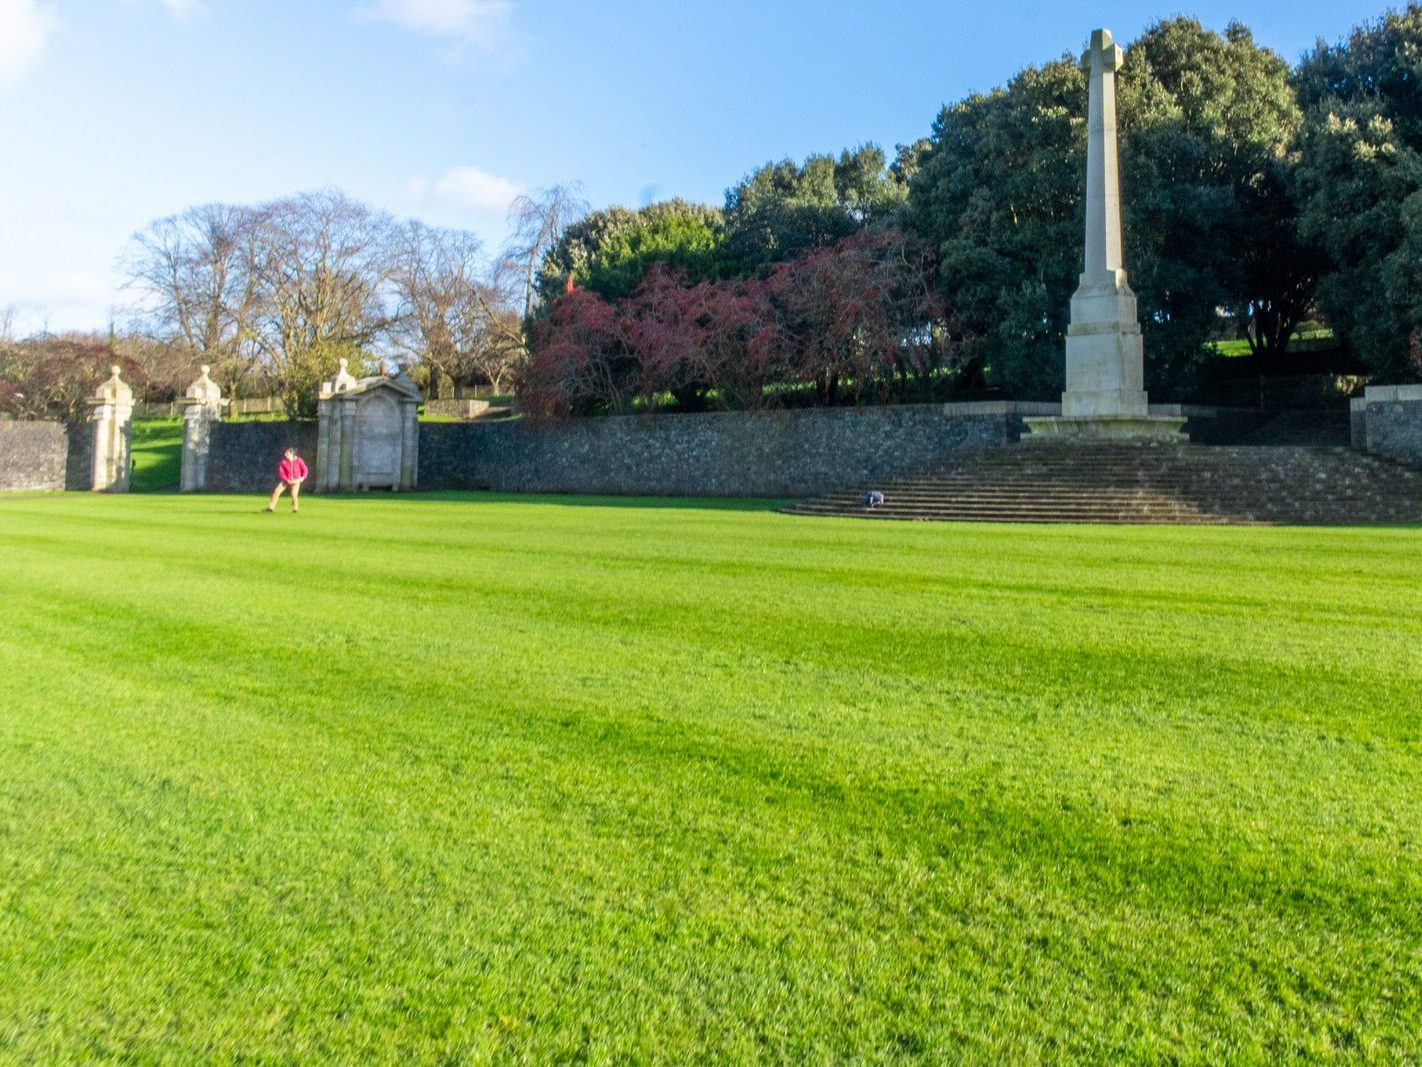 TODAY I VISITED THE IRISH NATIONAL WAR MEMORIAL GARDENS [ON THE SOUTH BANK OF THE RIVER LIFFEY]-223123-1